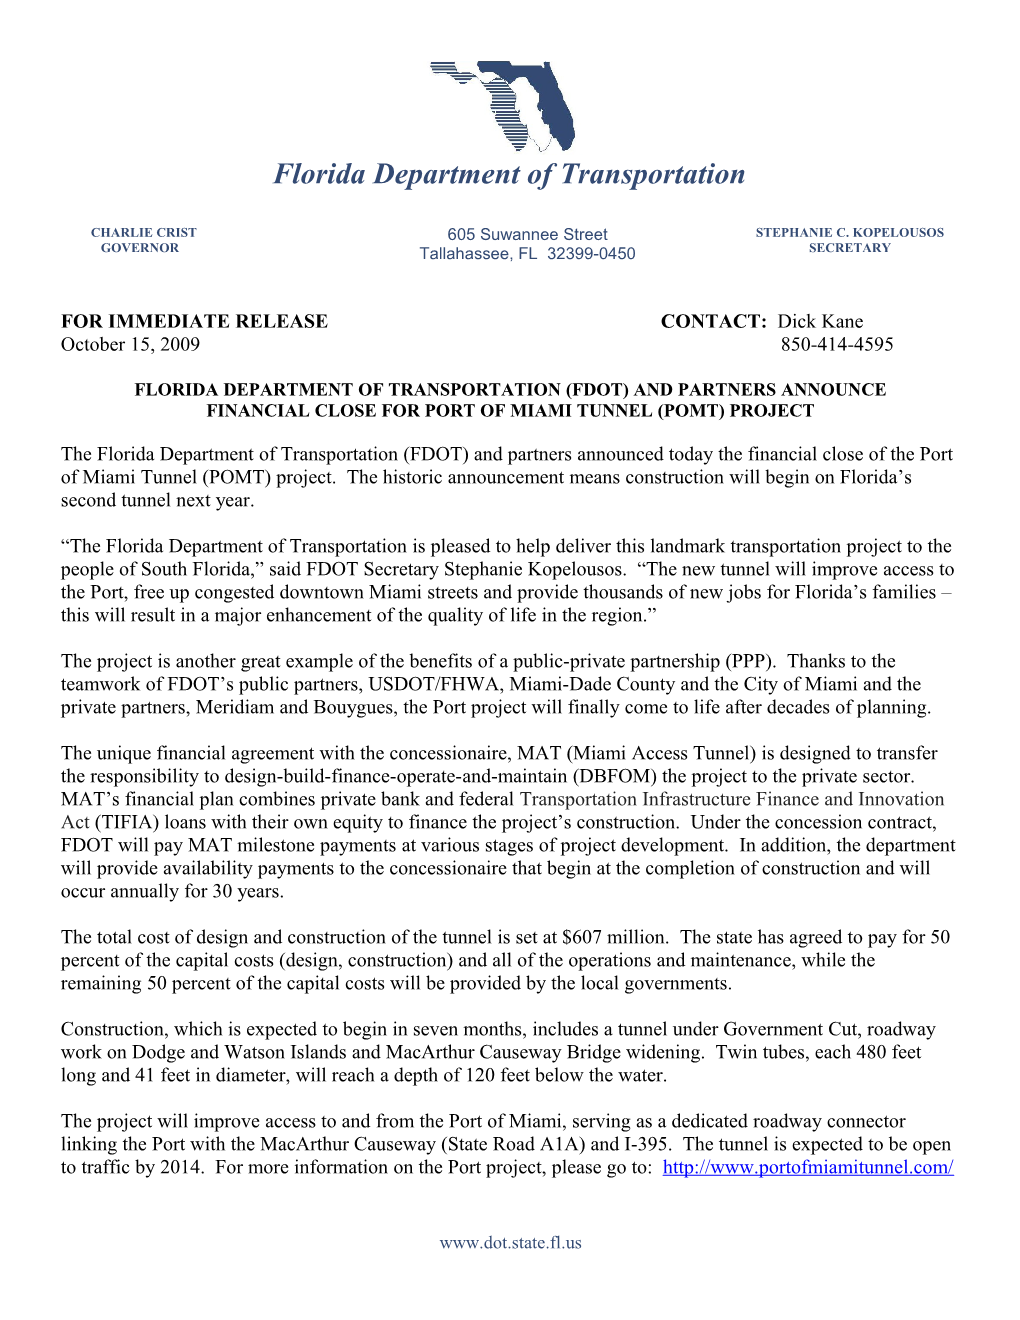 Florida Department of Transportation (Fdot) and Partners Announce